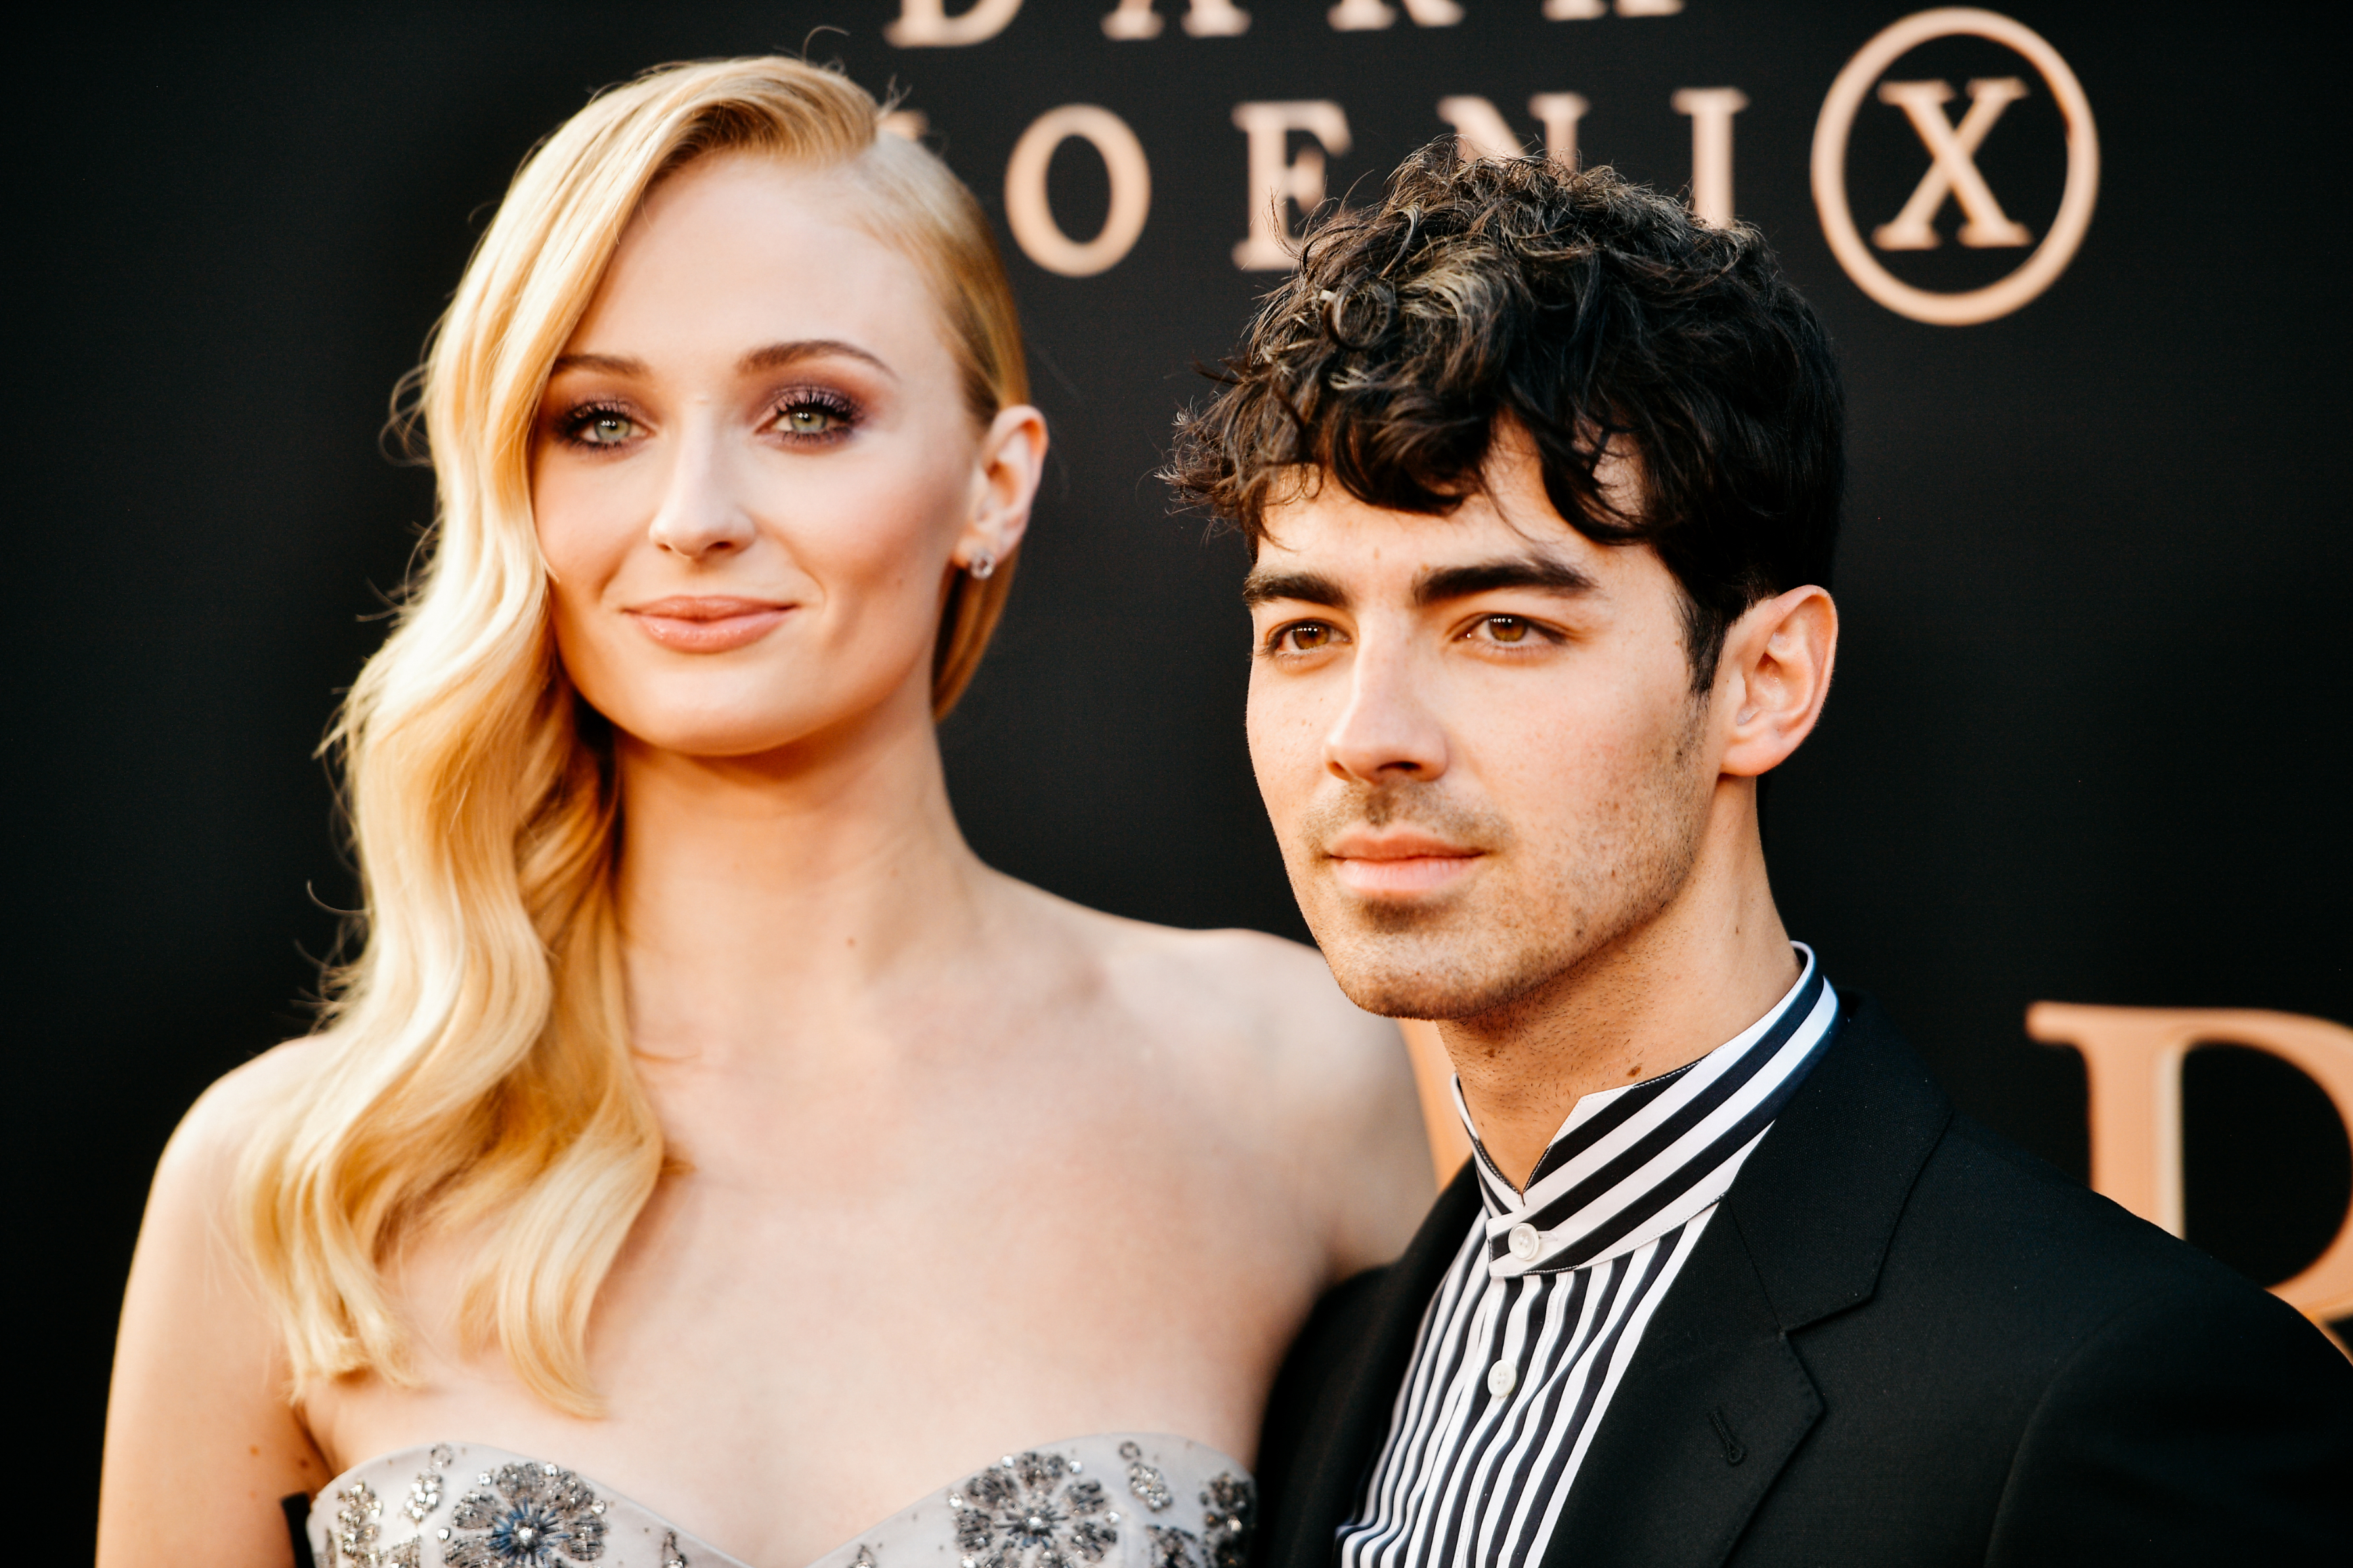 Sophie Turner in a glittery strapless dress with Joe Jonas in a striped suit, posing at an event